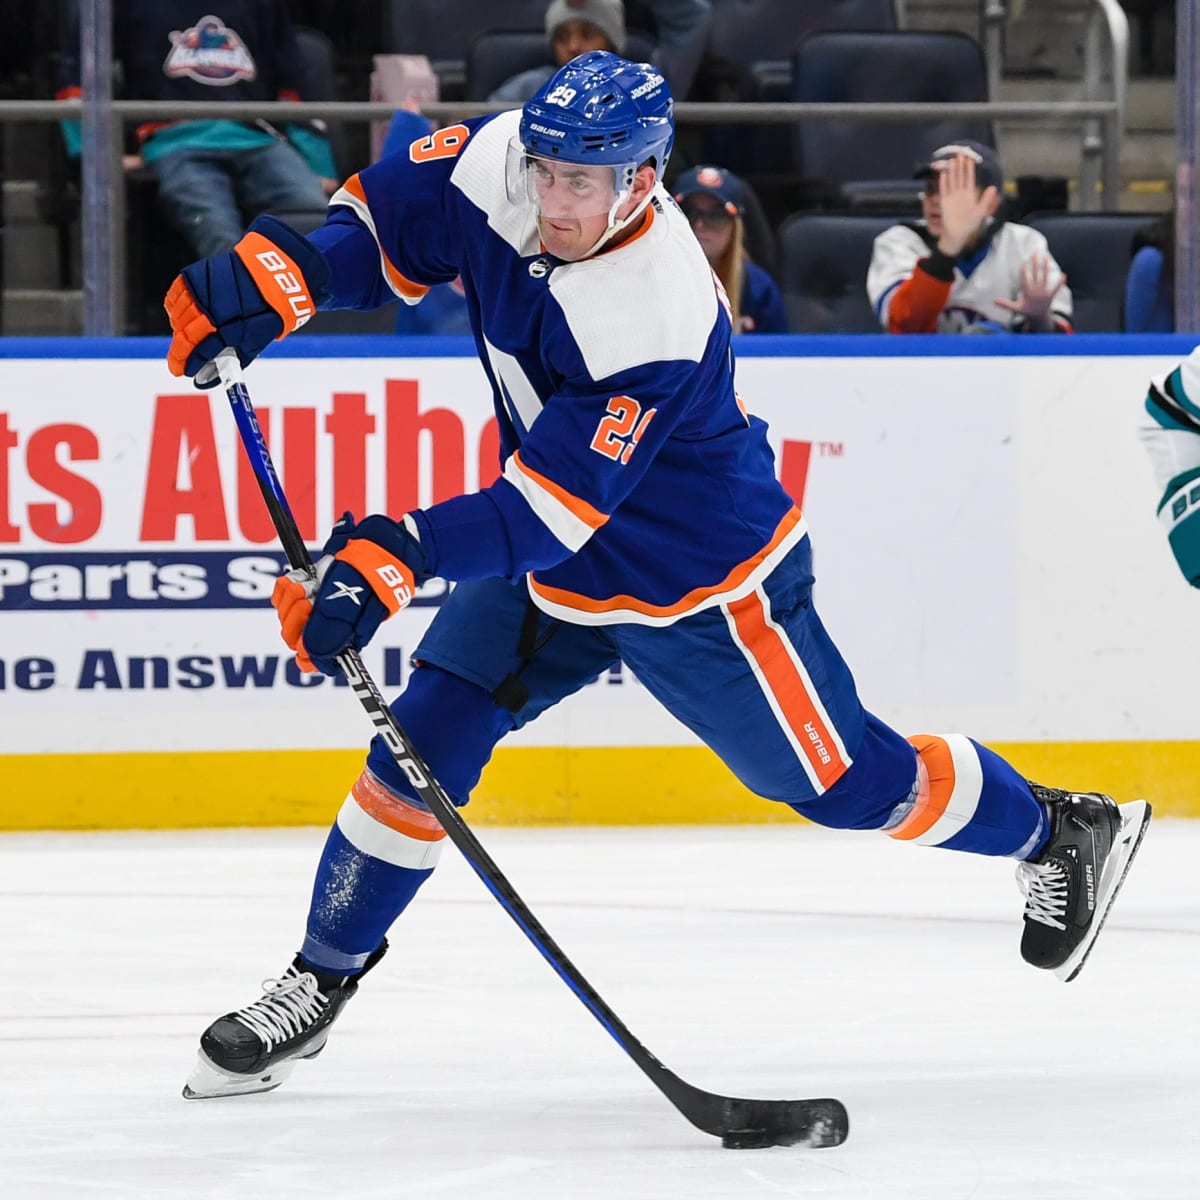 Brock Nelson's injury could slow Islanders' playoff push - Newsday